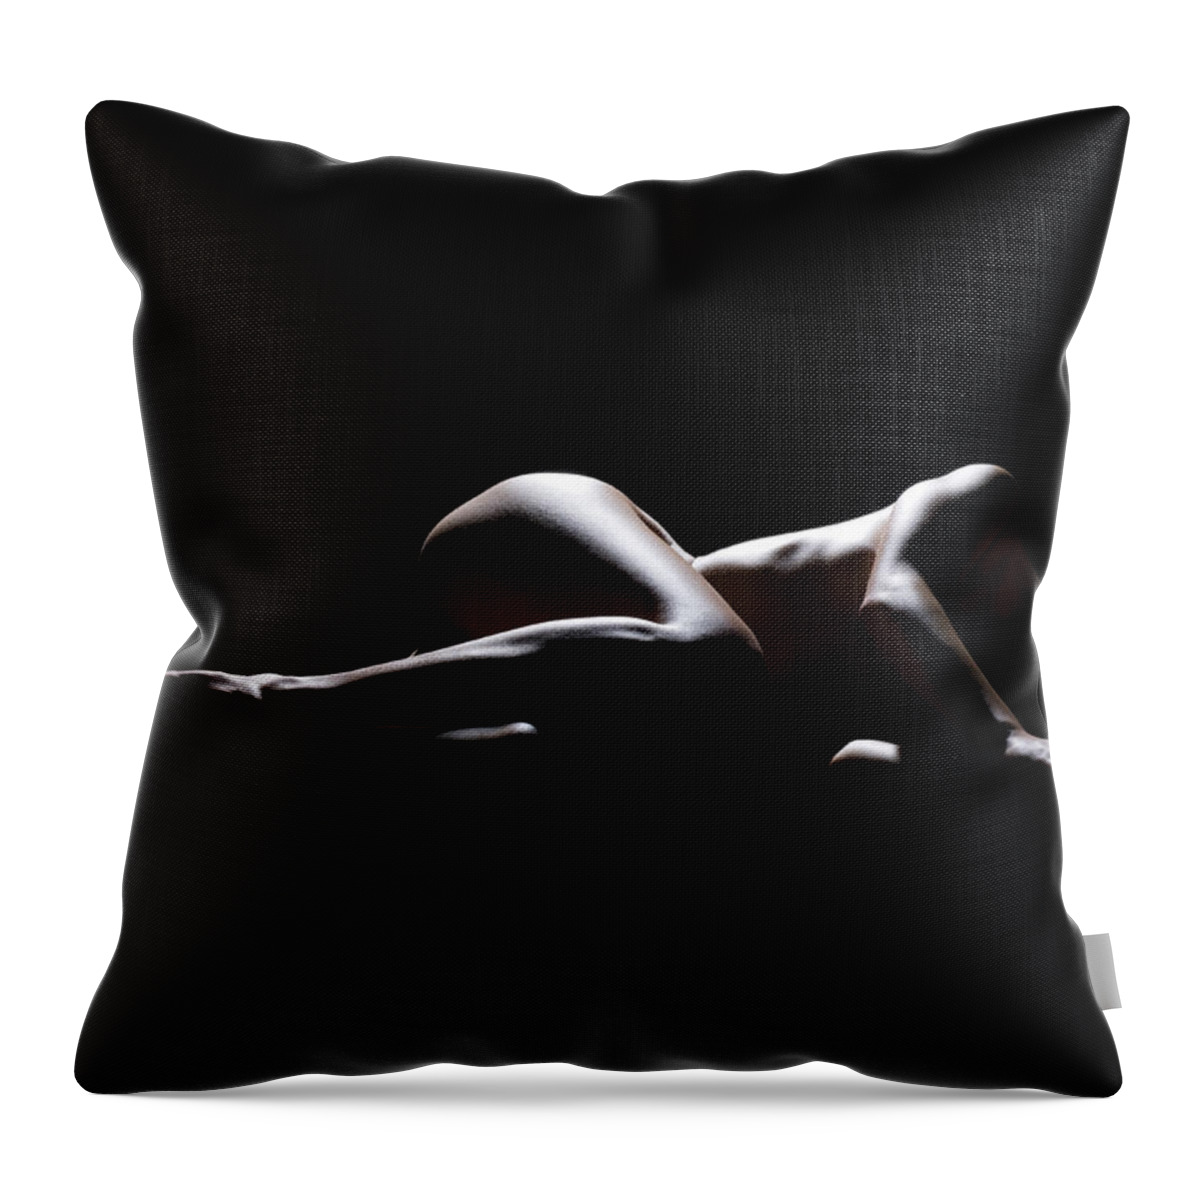 Tranquility Throw Pillow featuring the photograph Woman Lying Down In The Dark by Michael H